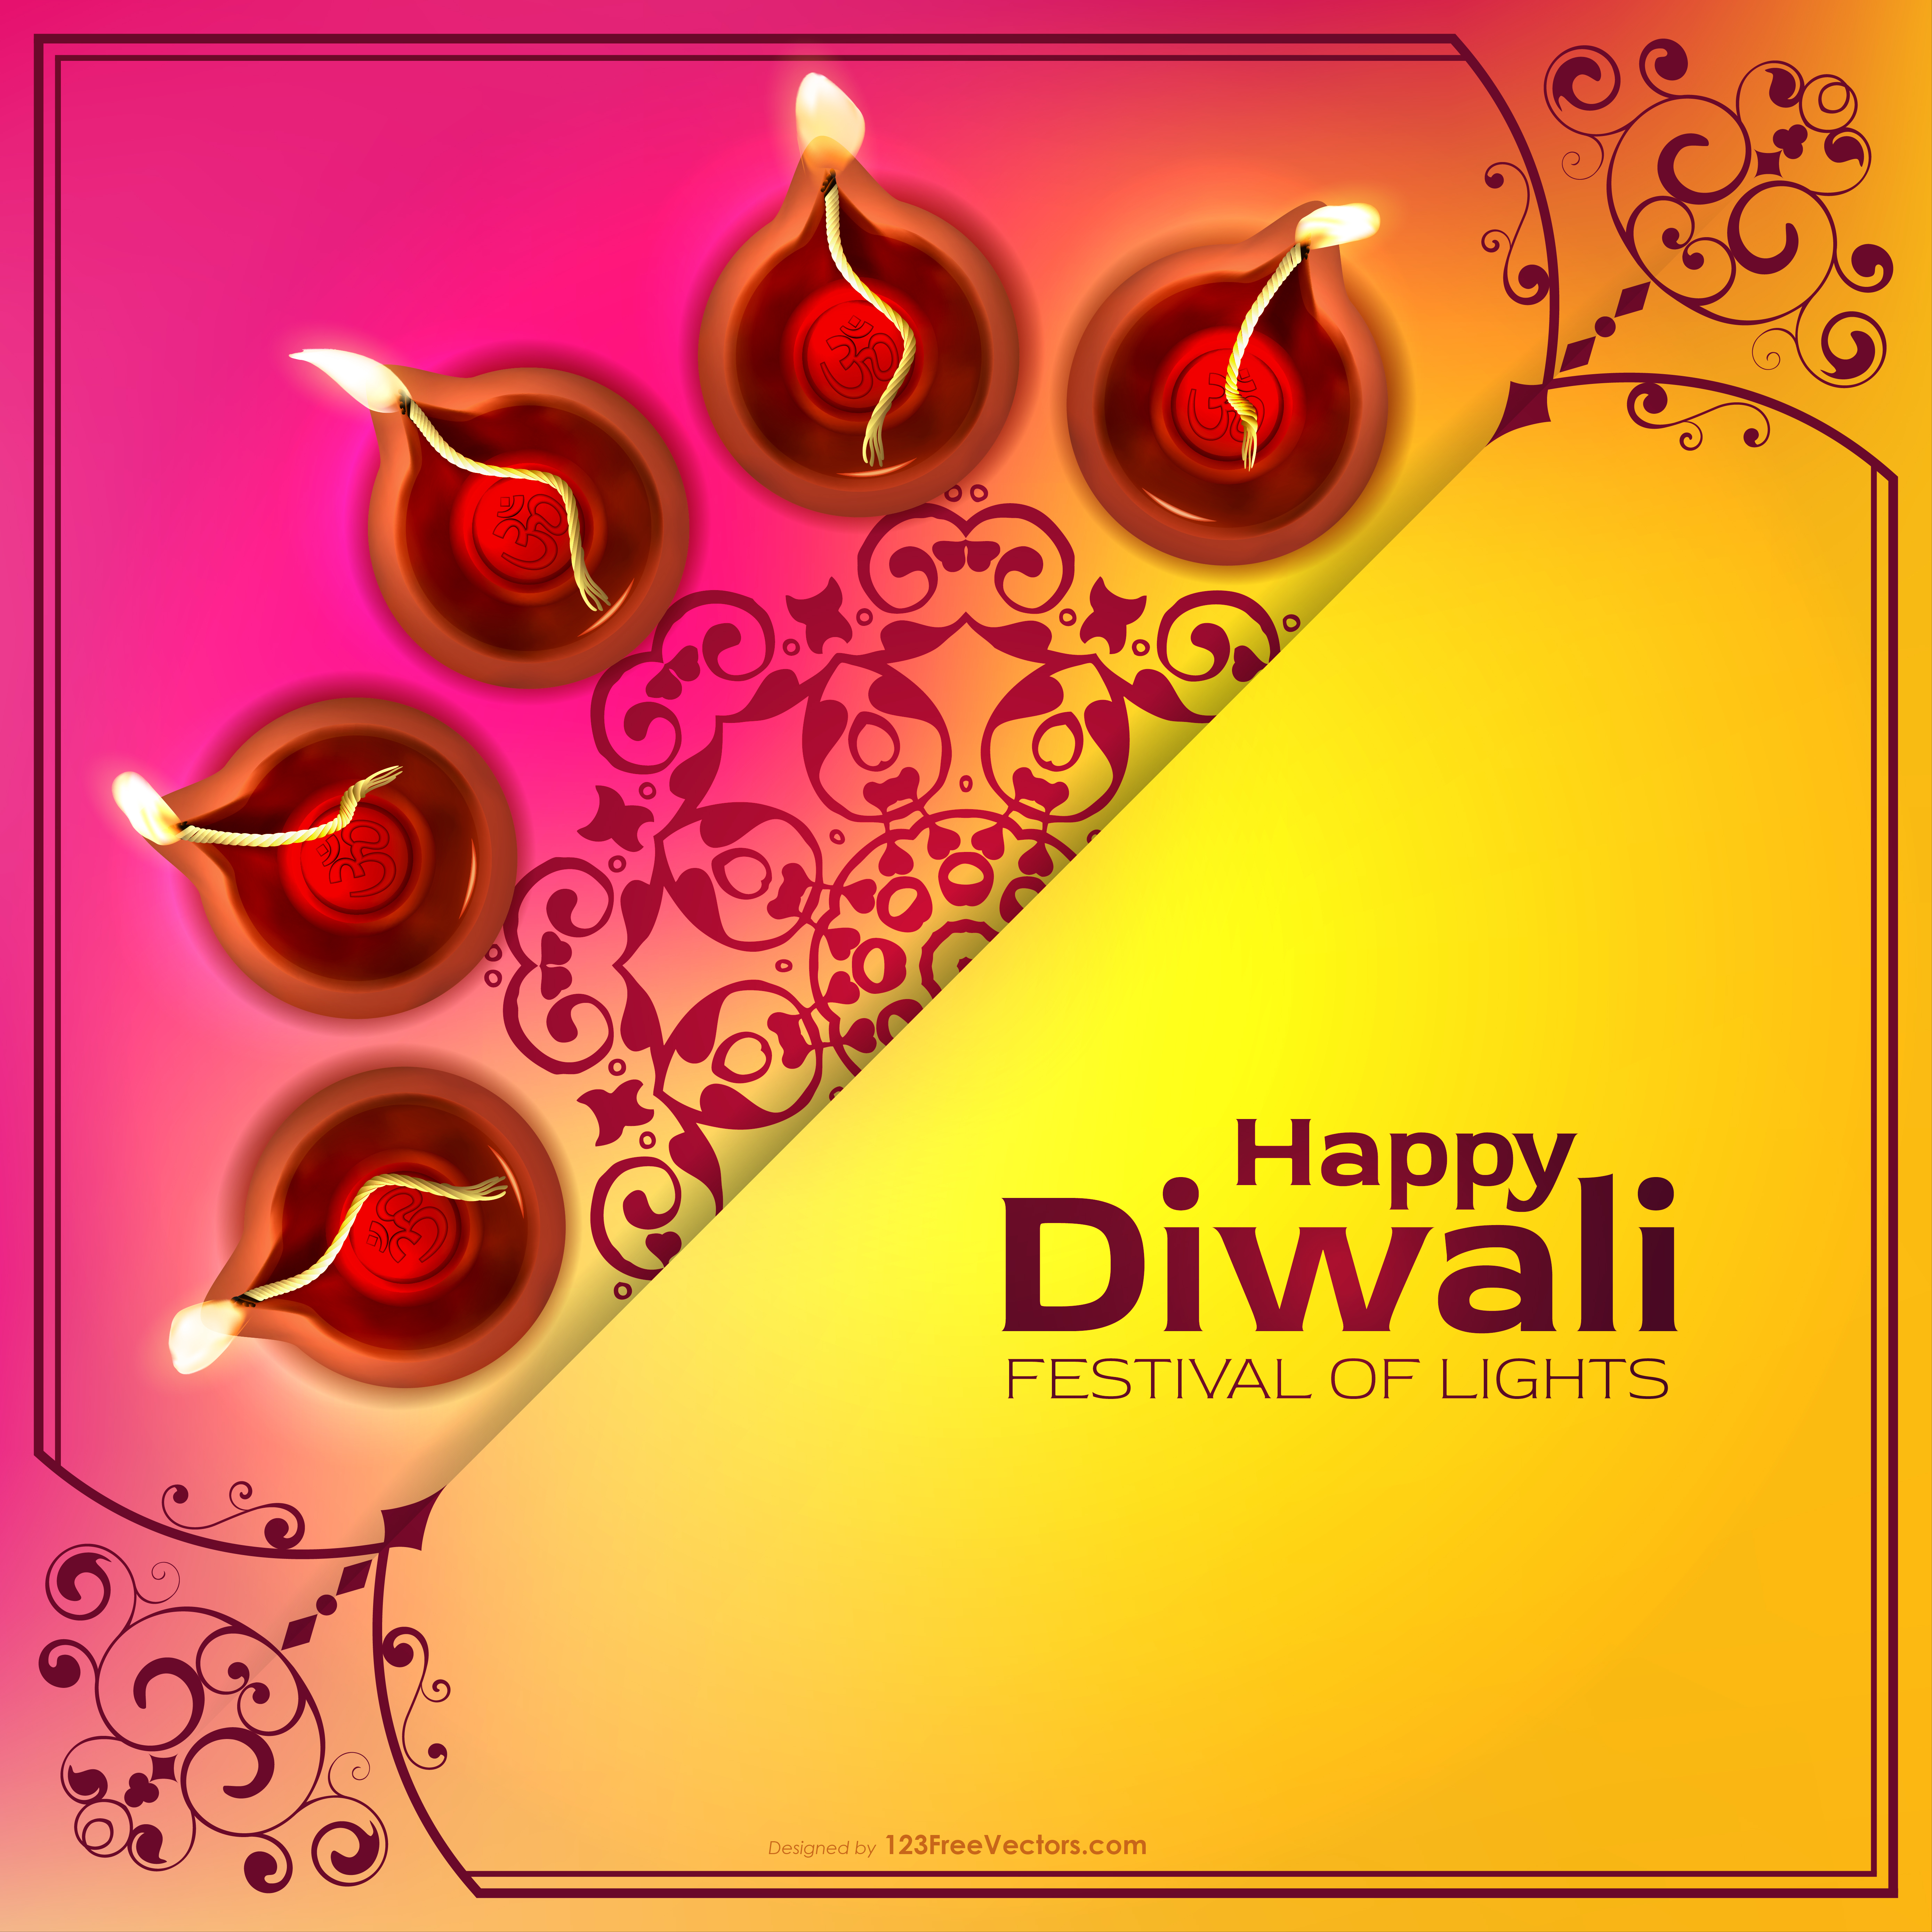 Free Vector  Happy diwali background with hanging diya and text space  vector illustration